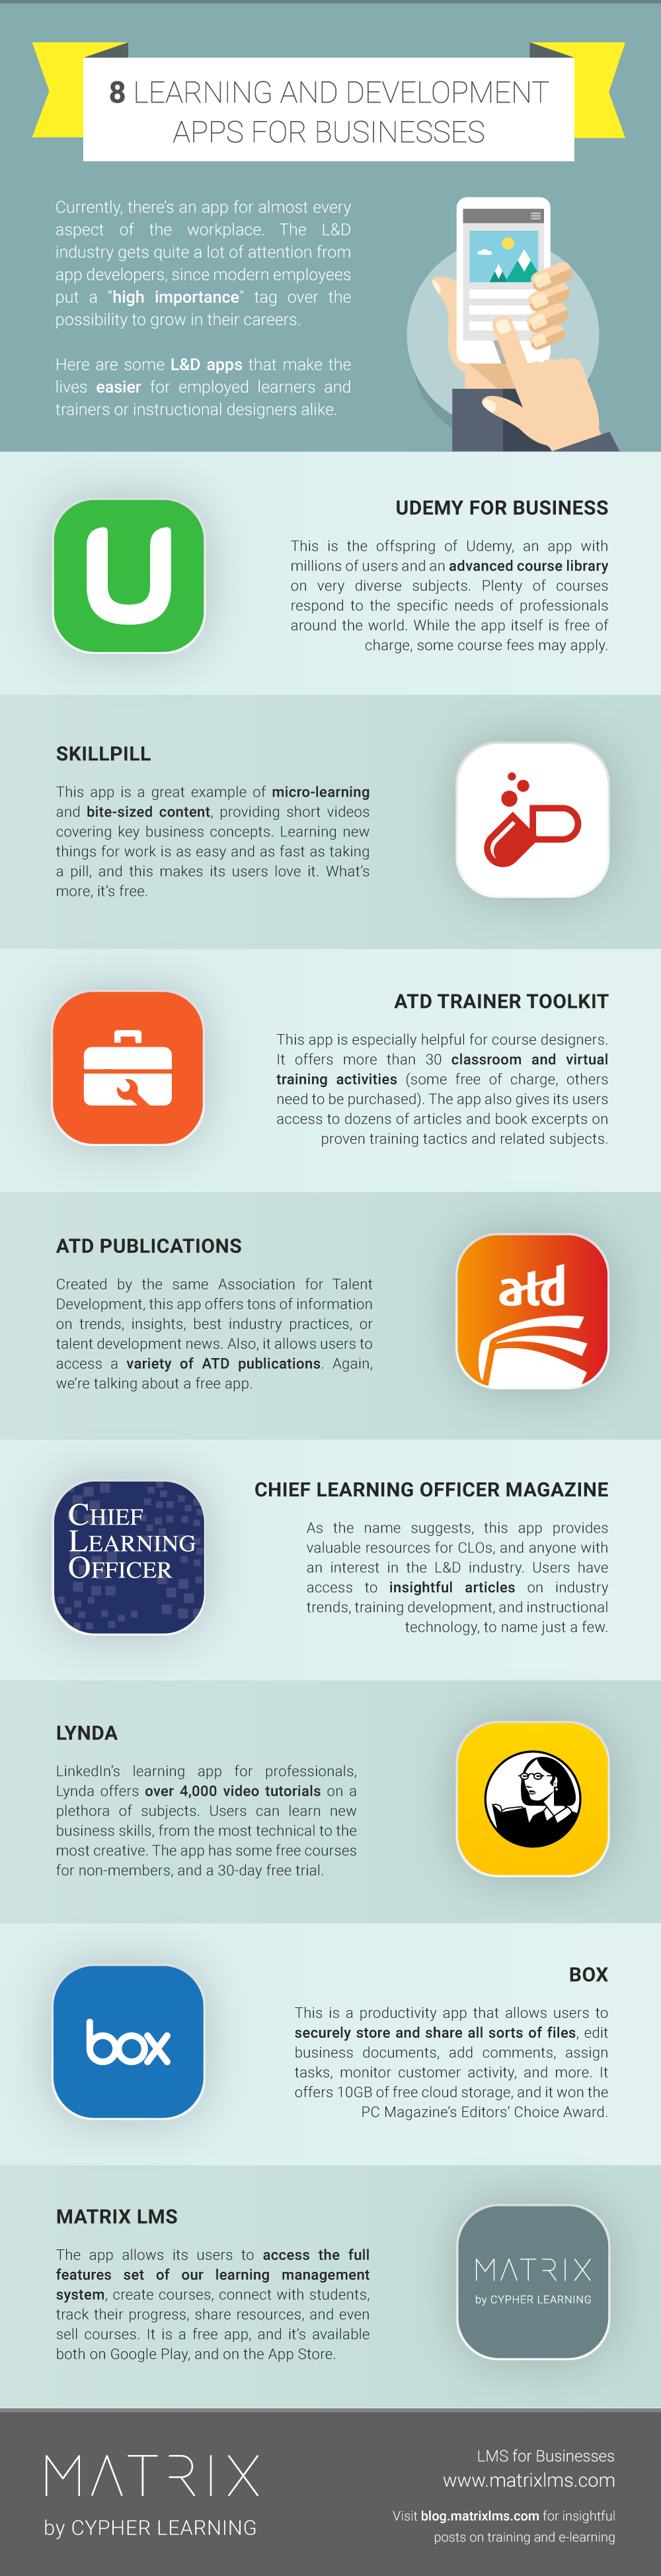 8-learning-and-development-apps-for-businesses Infographic